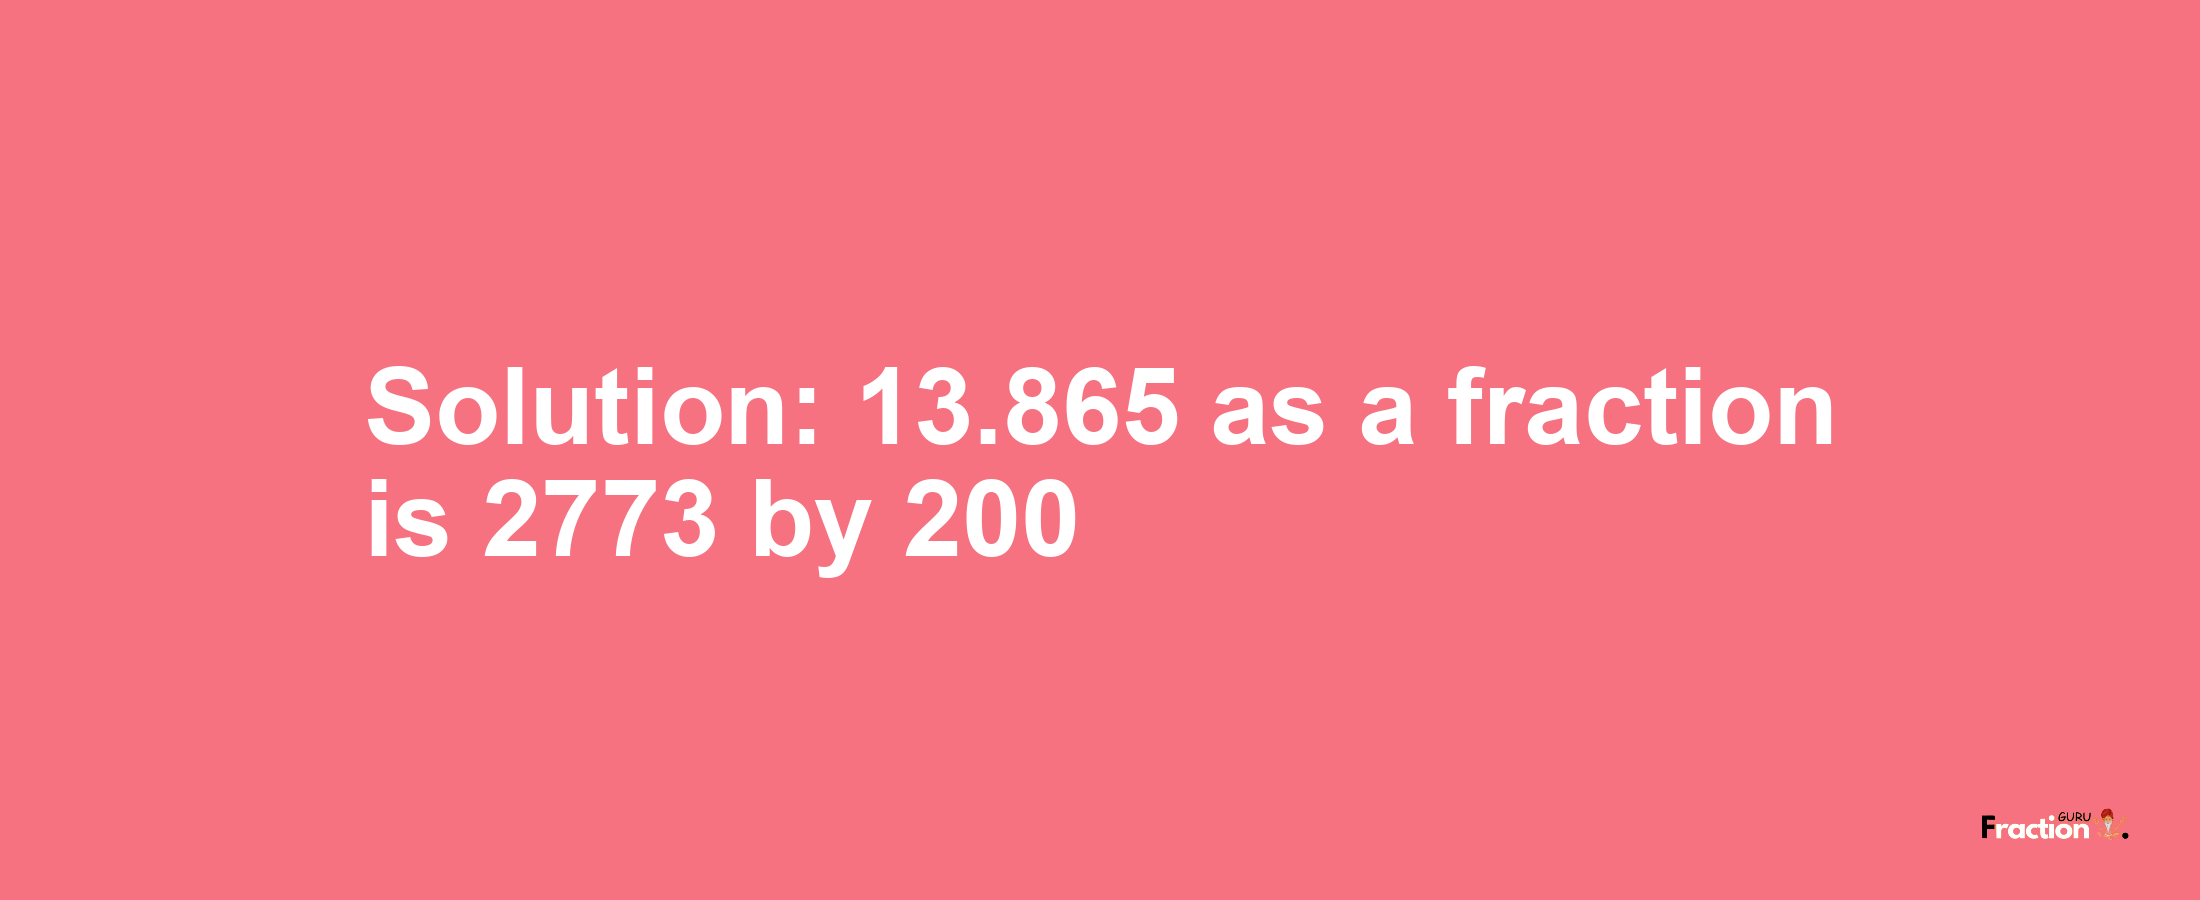 Solution:13.865 as a fraction is 2773/200